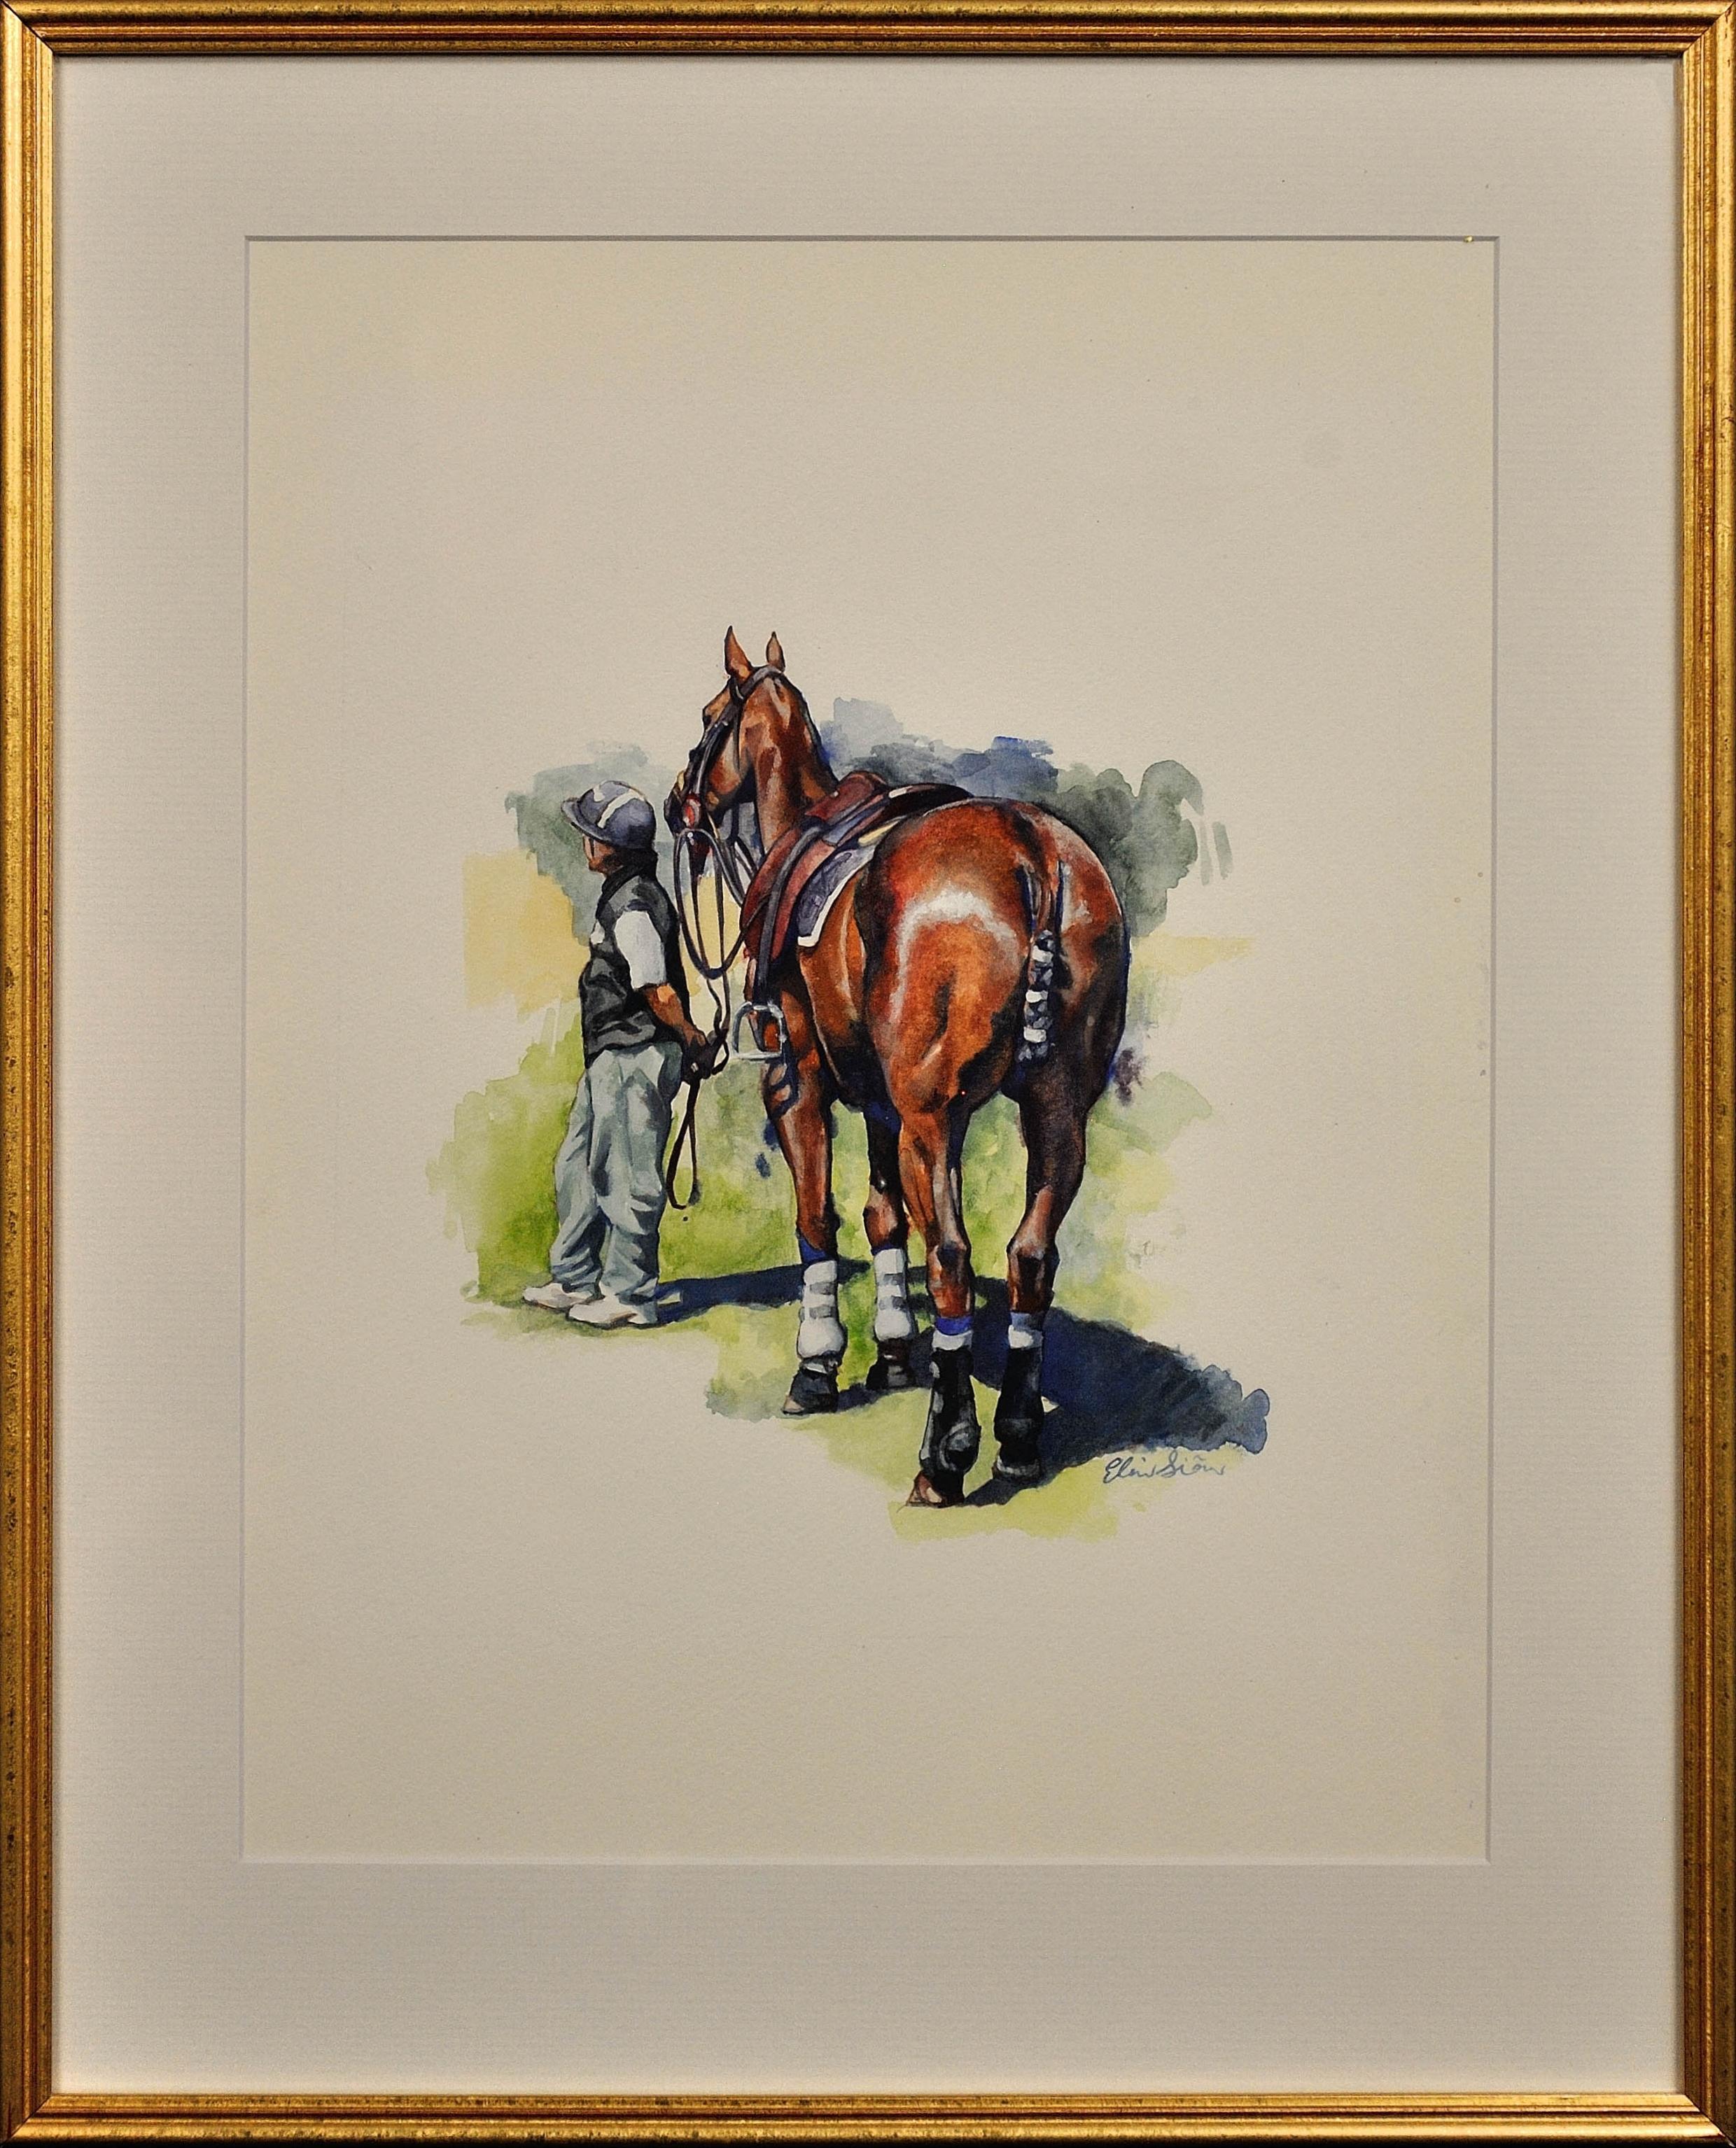 Polo Match, Cirencester, Player and Pony. Cotswolds. Parkland. Framed Watercolor